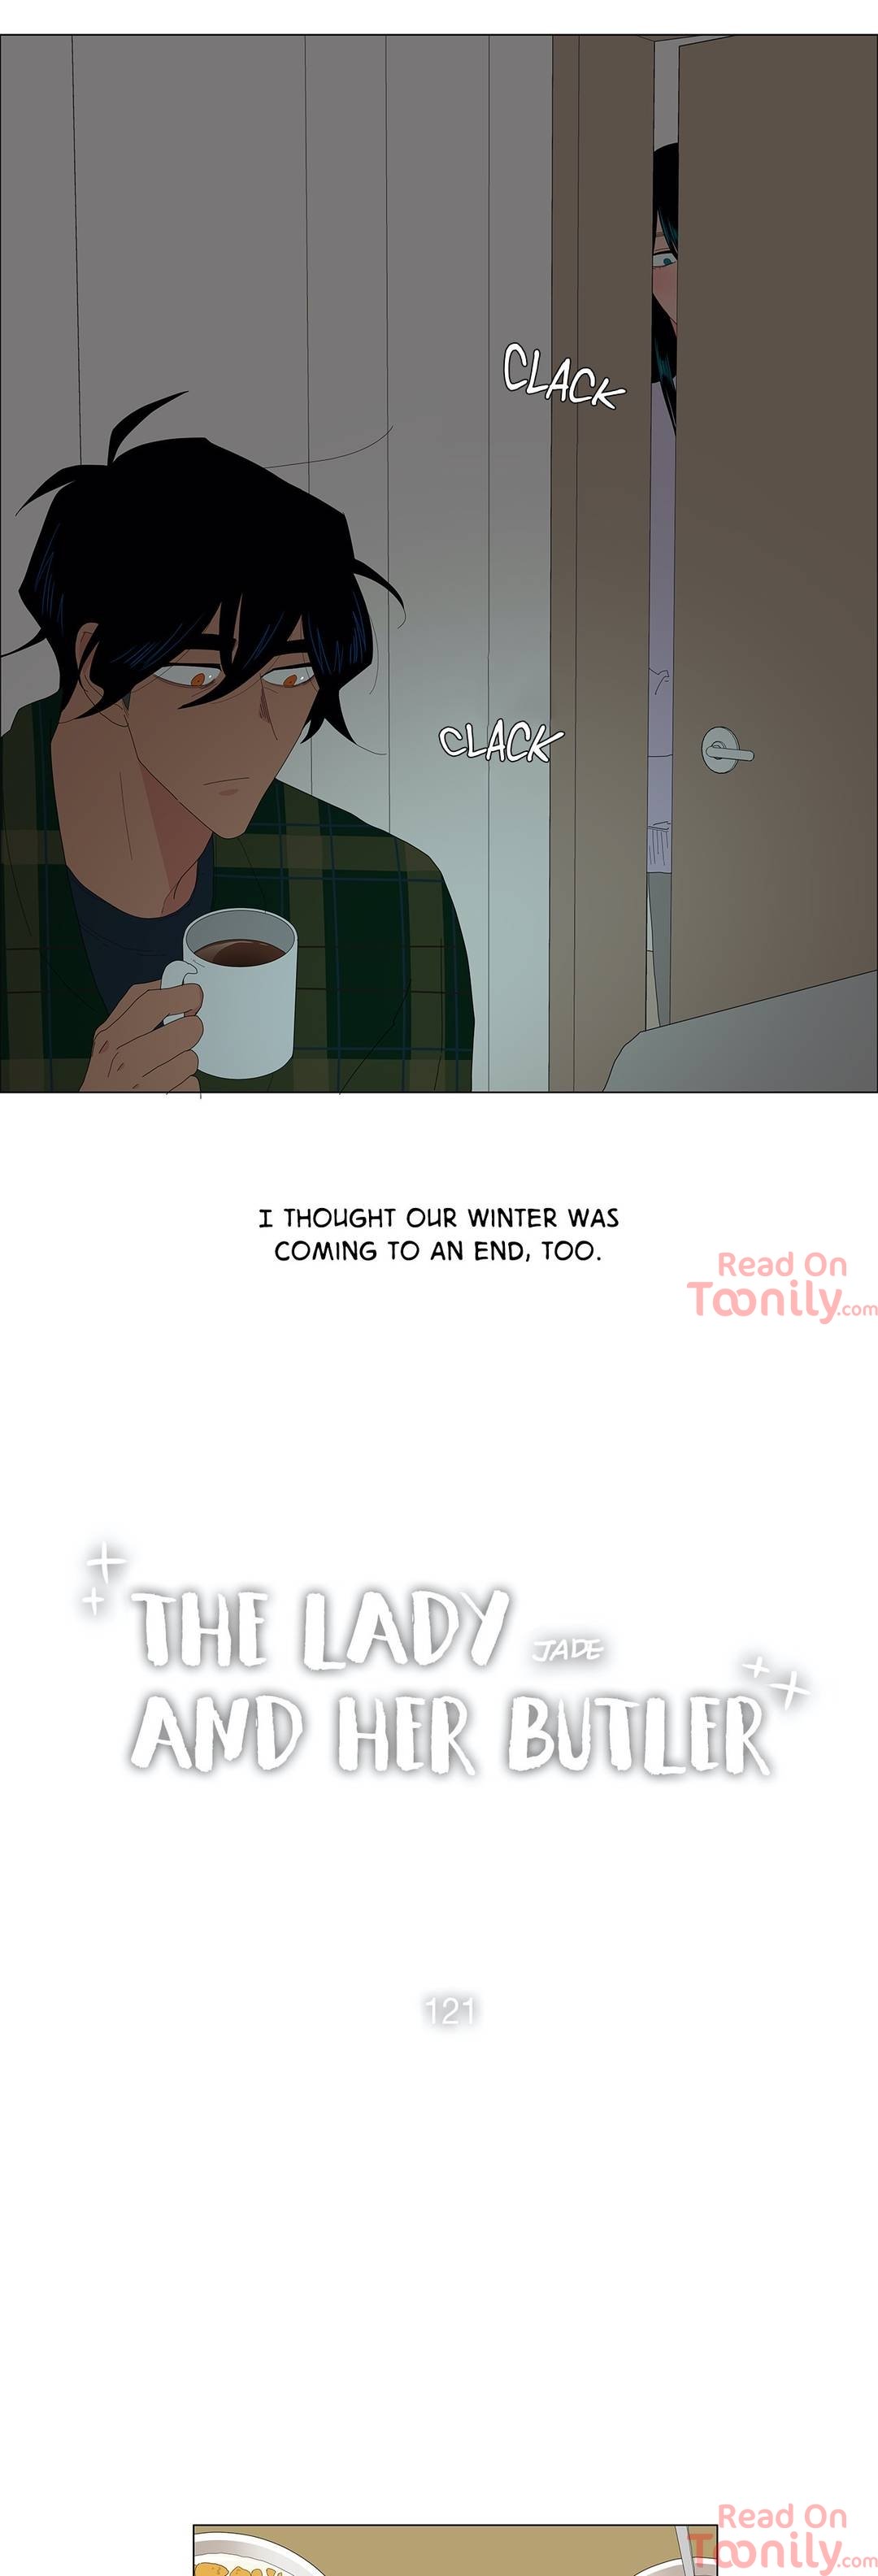 The Lady And Her Butler - Page 1